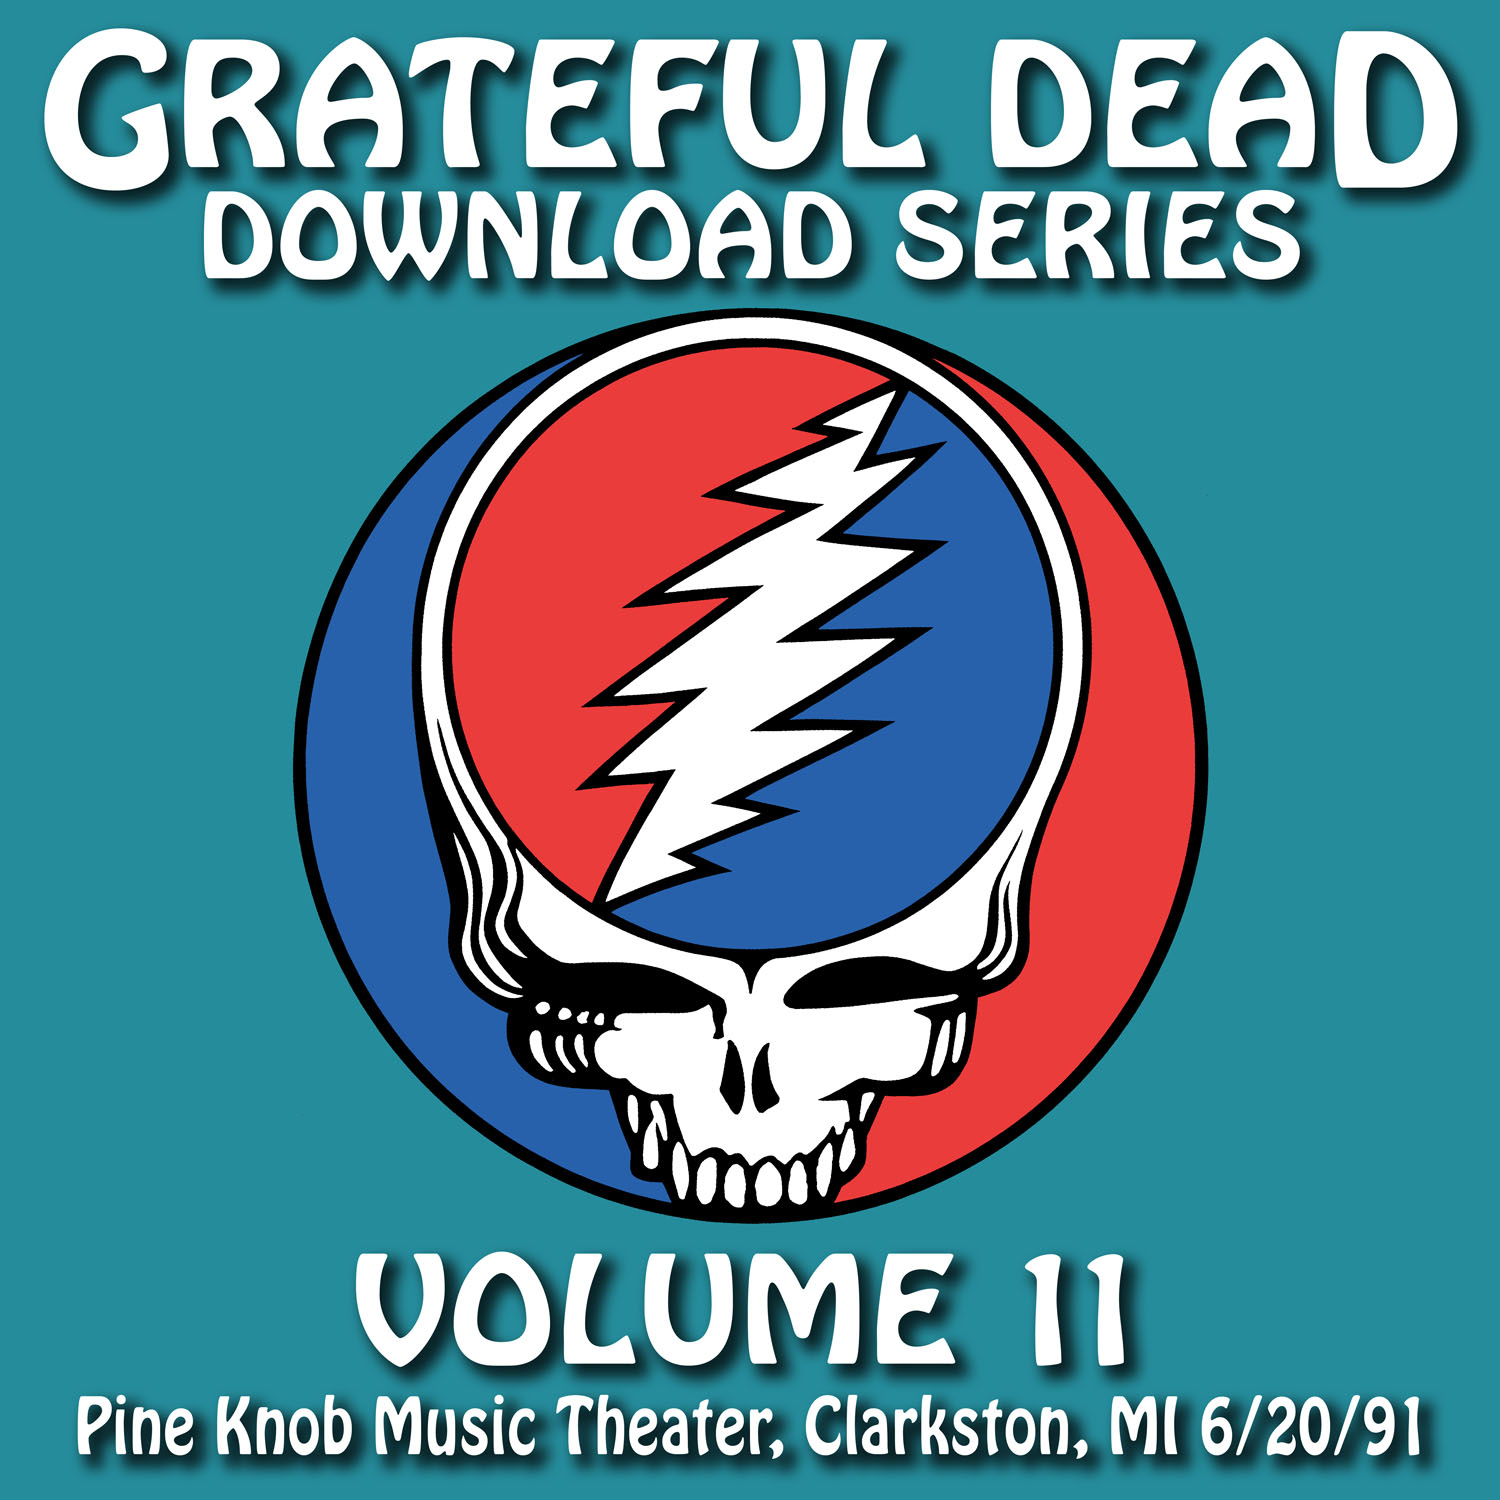 Standing on the Moon (Live at Pine Knob Music Theater, Clarkston, MI, June 20, 1991)